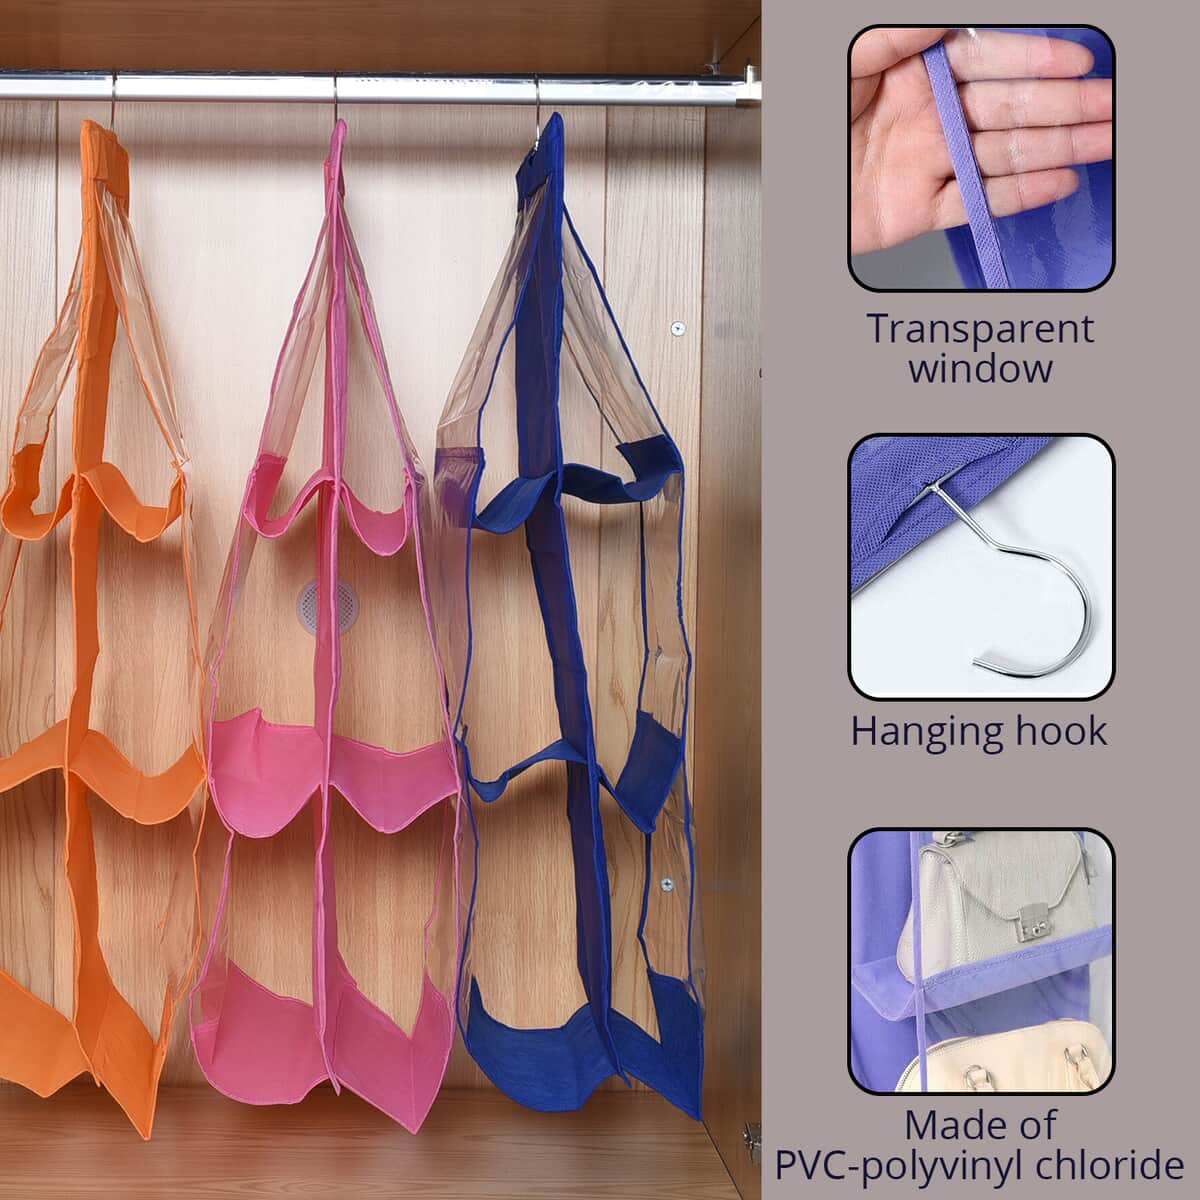 Set of 3 Orange, Dark Blue and Pink Non-Woven Hanging Storage Bag wih Large Clear Window (12.8"x31") image number 2